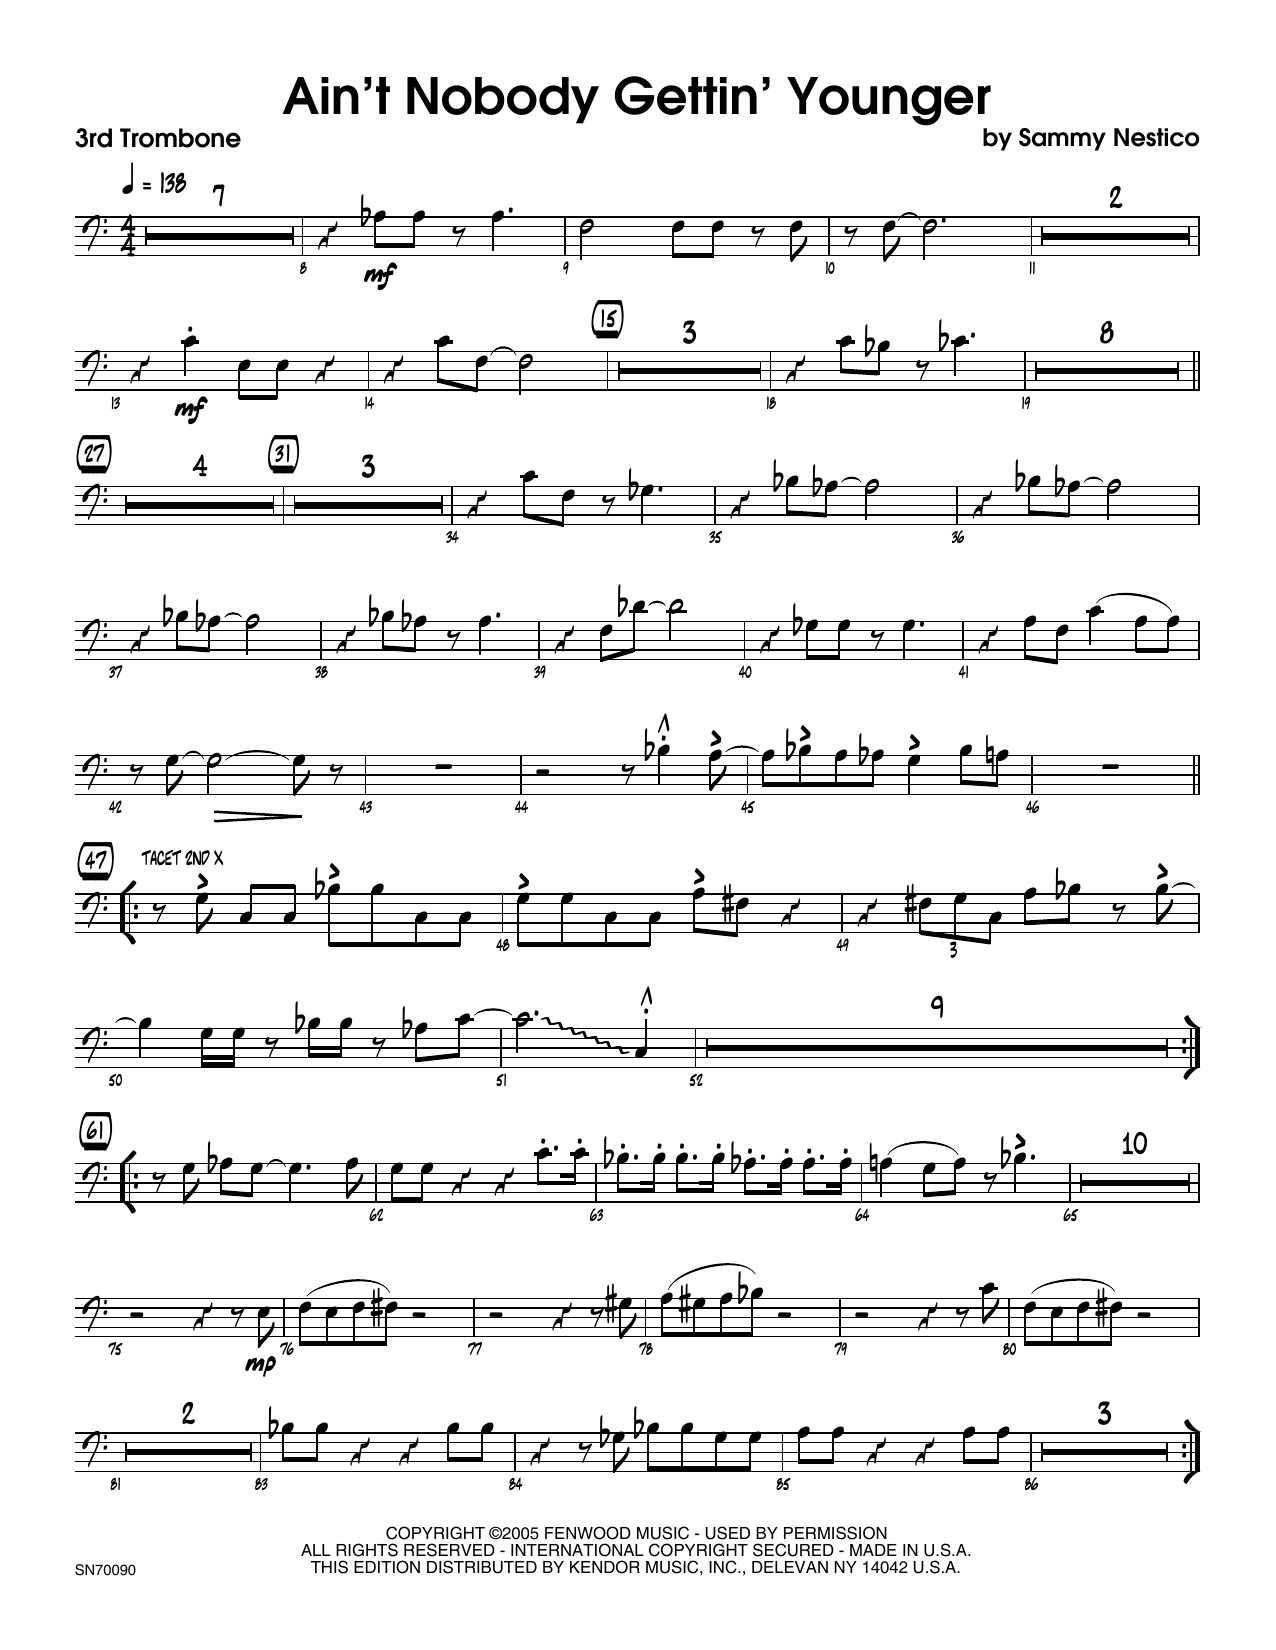 Download Sammy Nestico Ain't Nobody Gettin' Younger - 3rd Trom Sheet Music